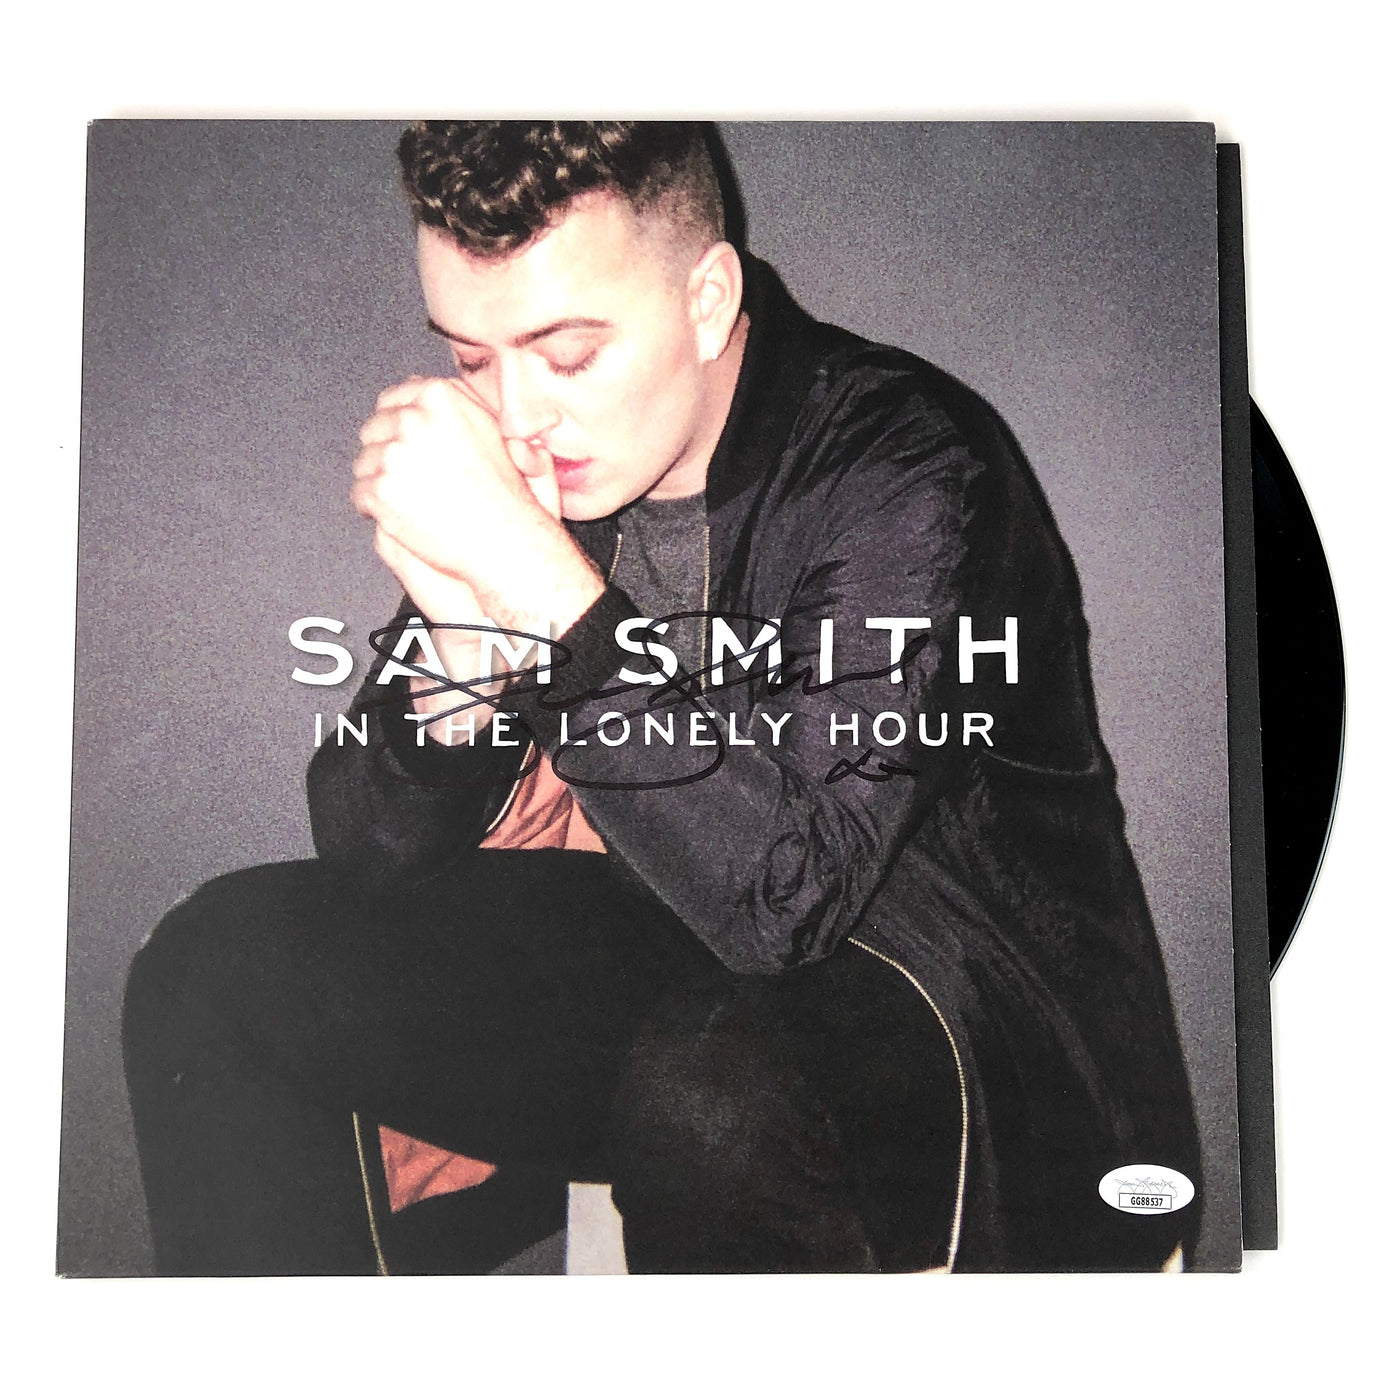 Sam Smith Autograph In the Lonely Hour Vinyl Record JSA COA